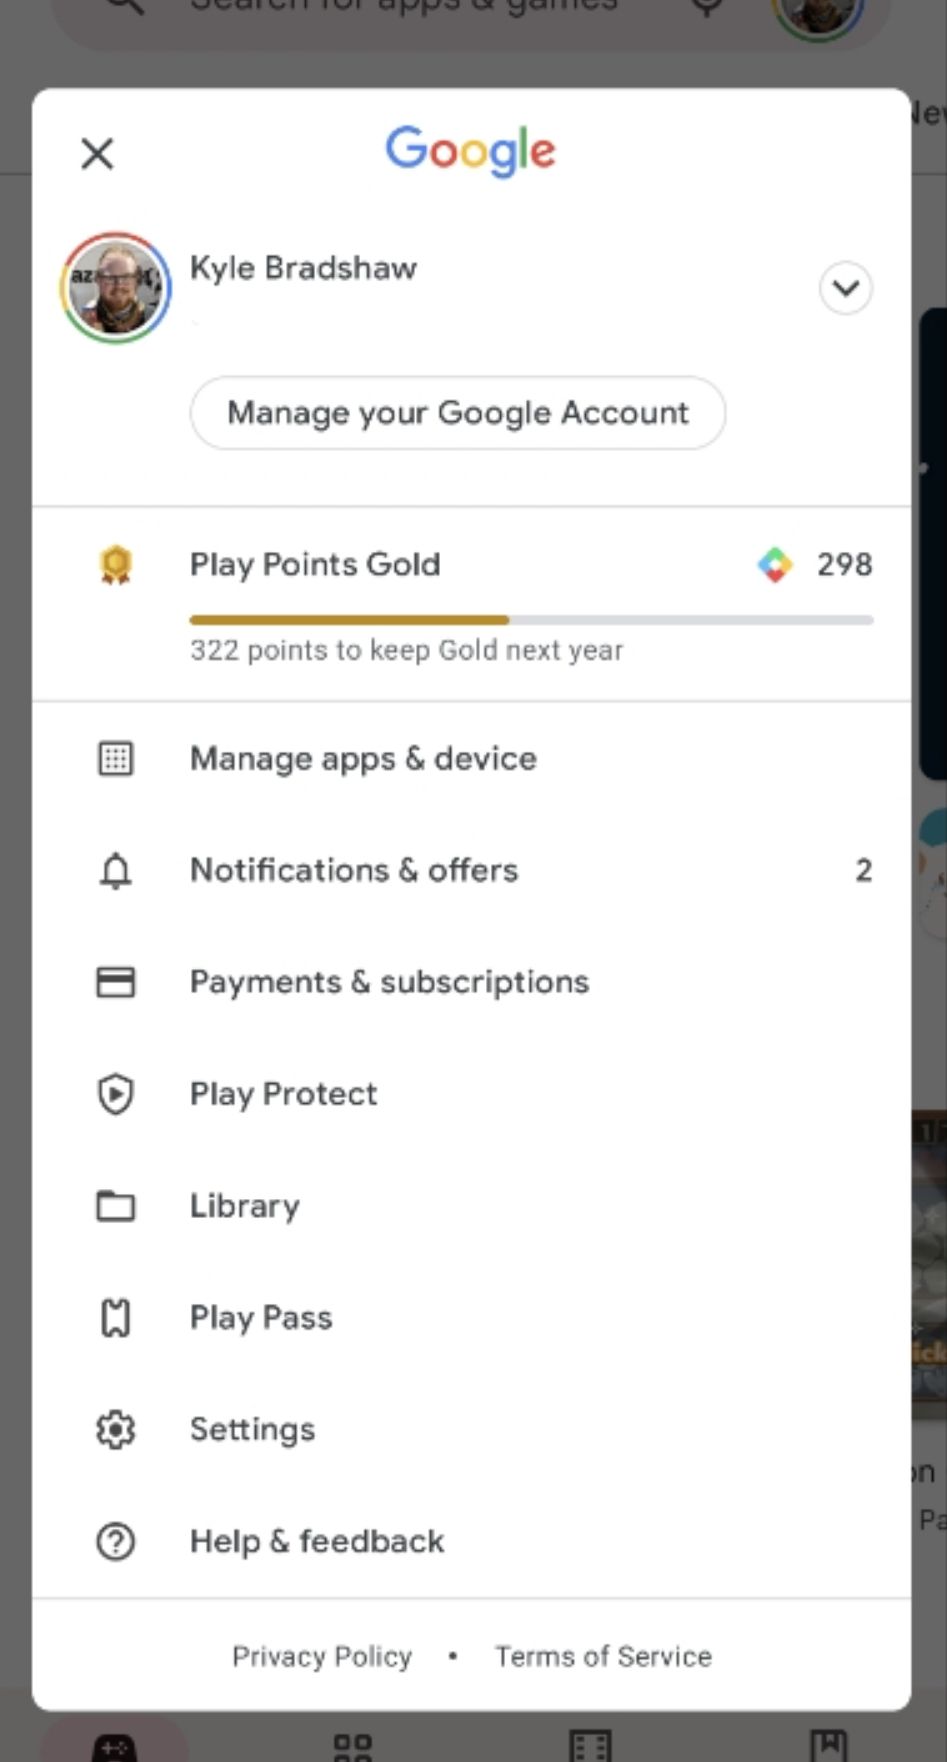 Google's Play System update Google Play System Updates for August, September 2022 Google Play System Update, 